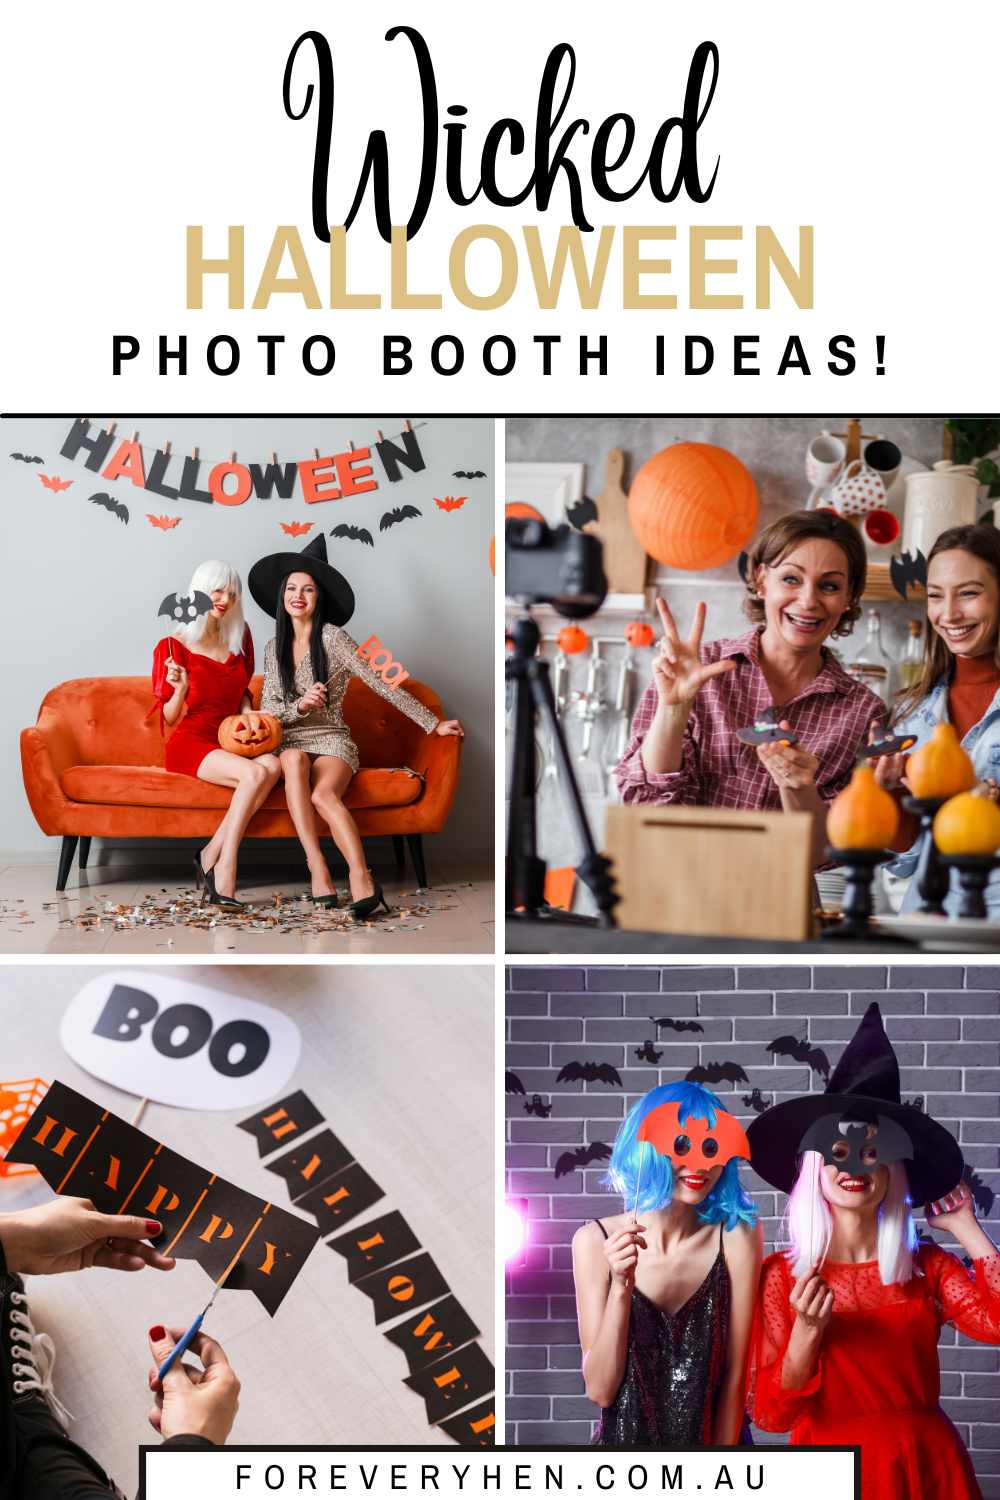 Halloween photo booth collage. Text overlay: Wicked Halloween photo booth ideas!